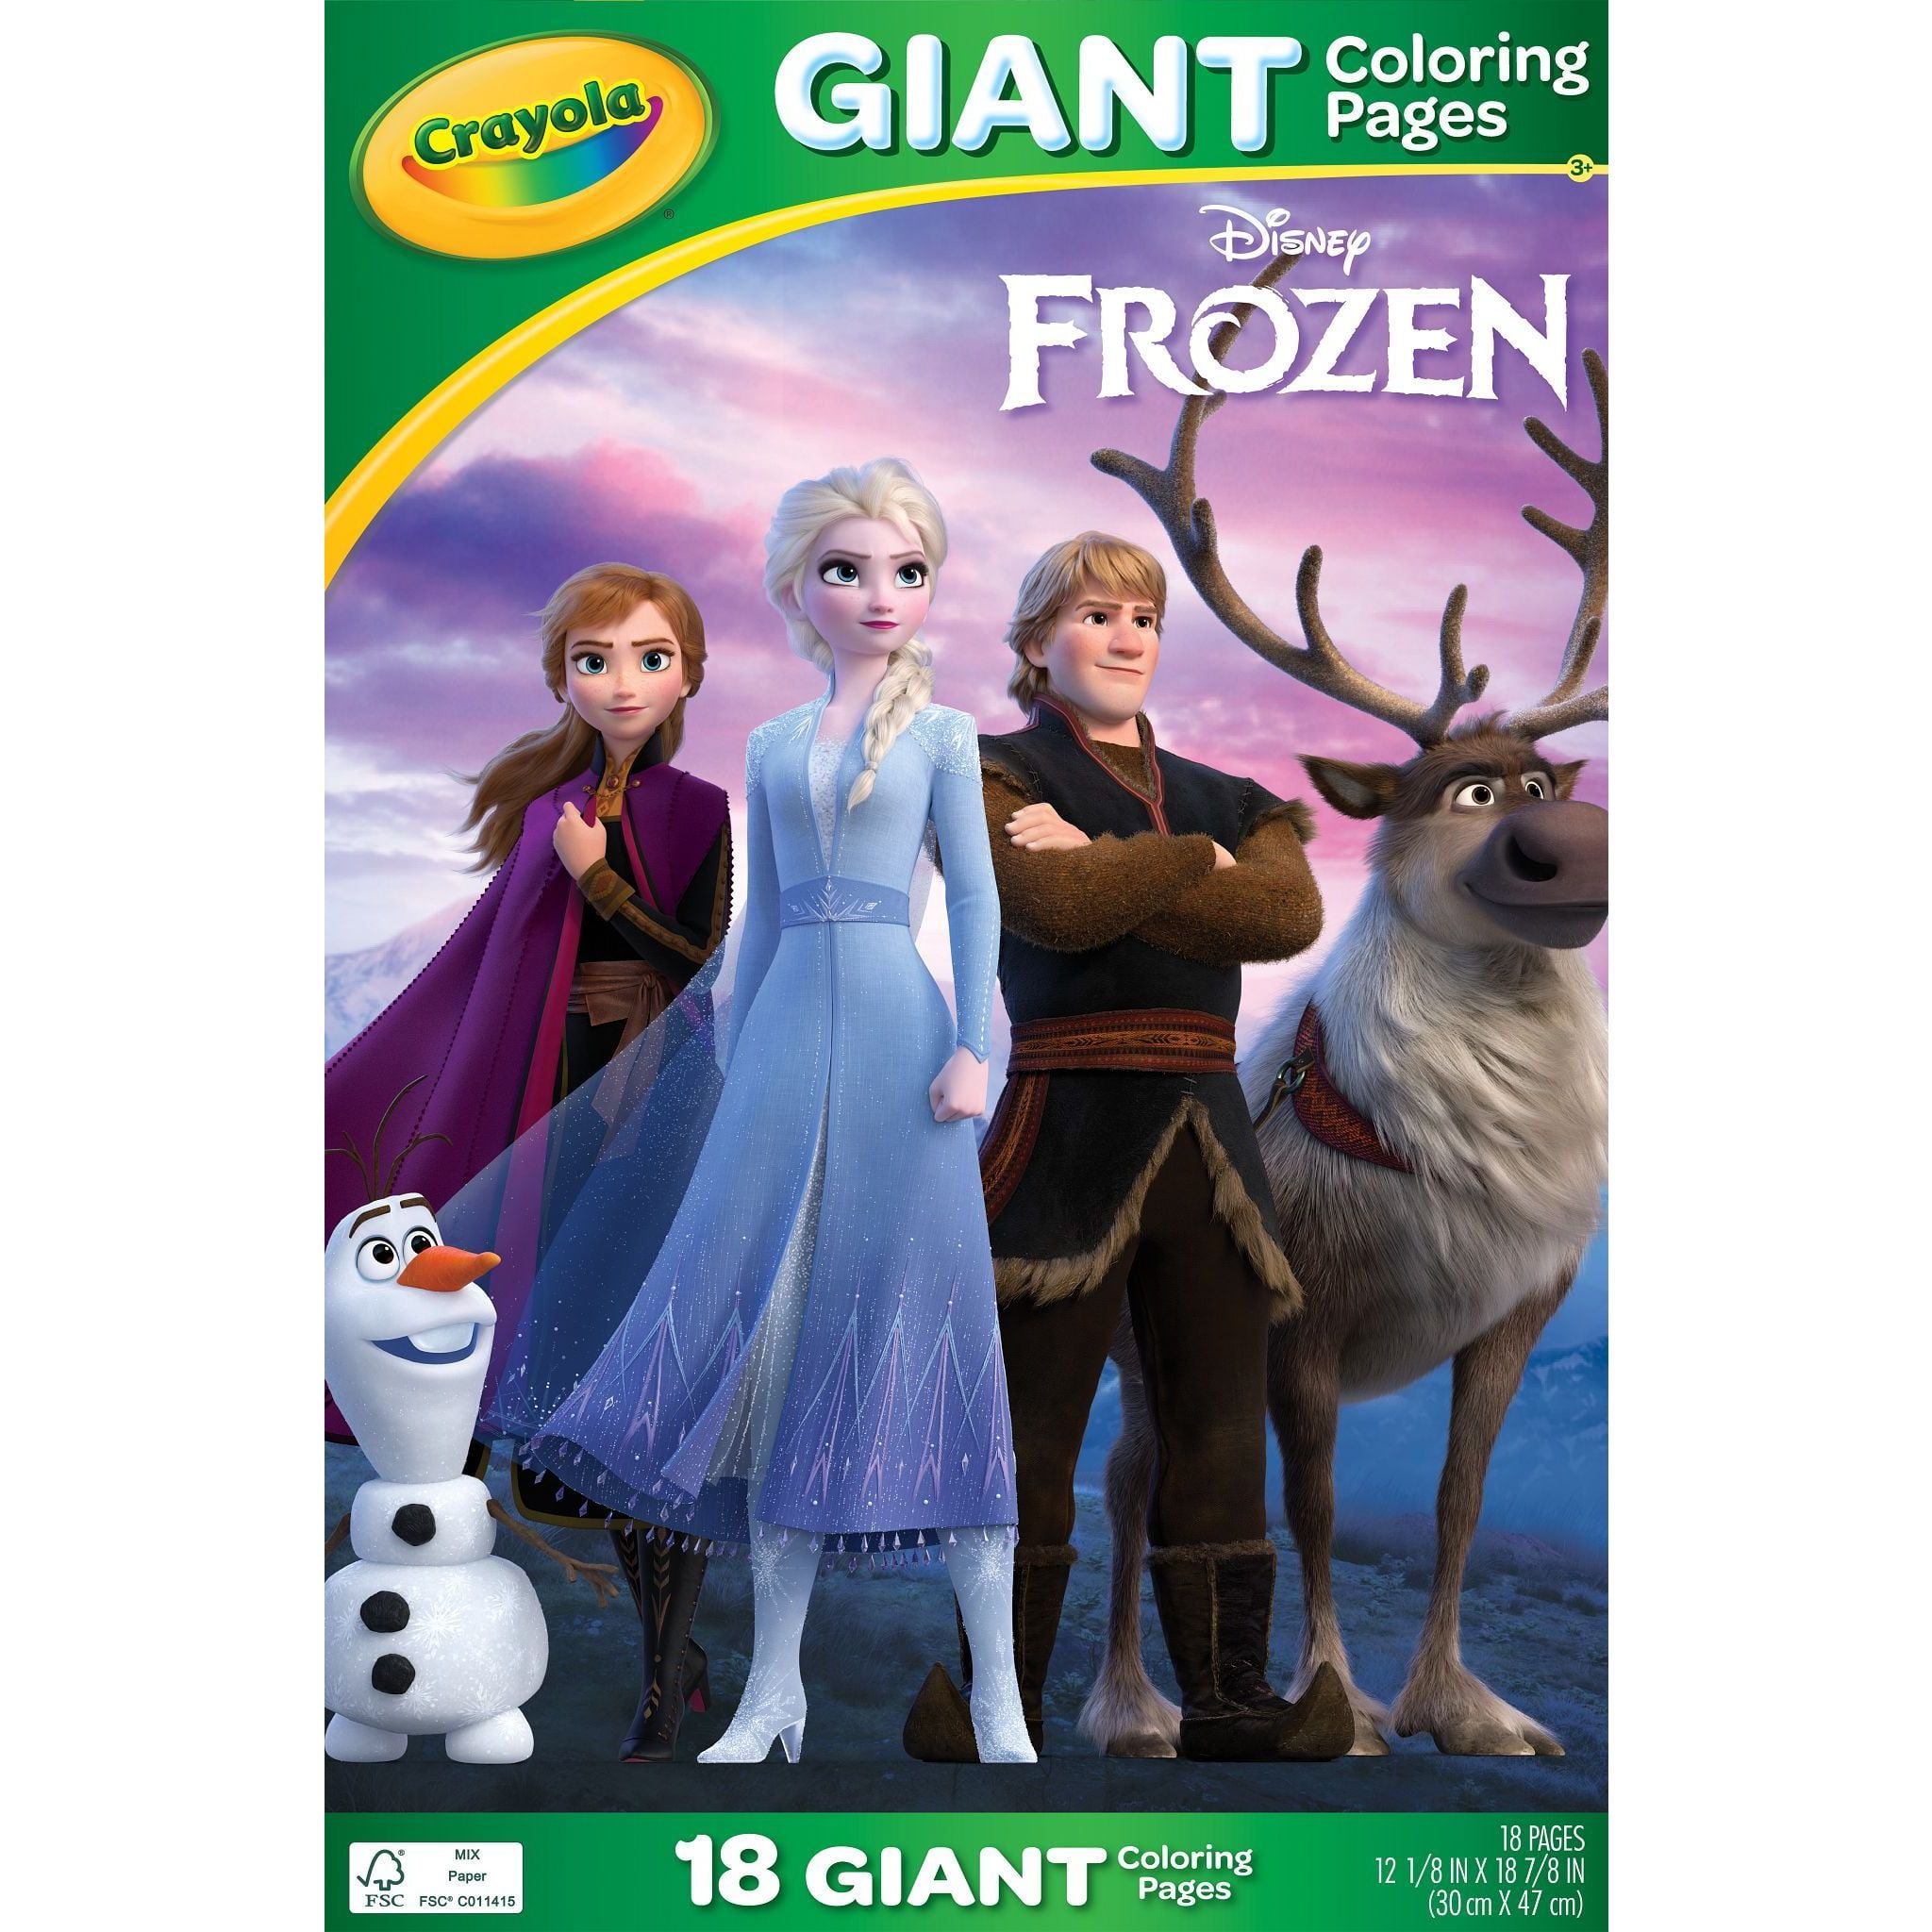 Crayola Frozen Giant Coloring Pages, 18 Coloring Pages, Gift for Kids